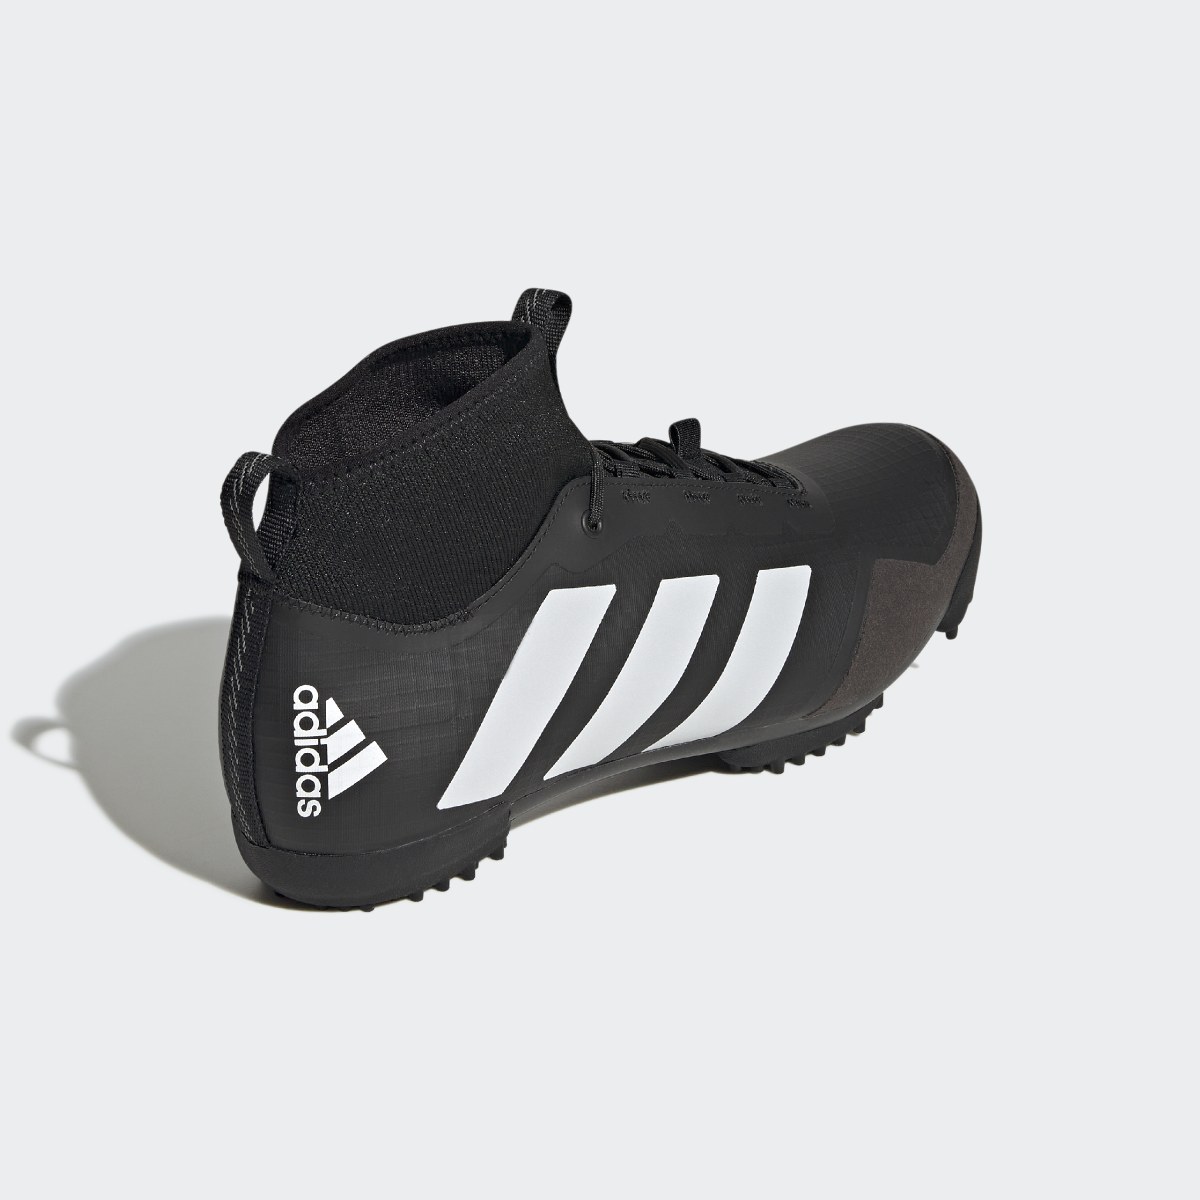 Adidas The Gravel Cycling Shoes. 6